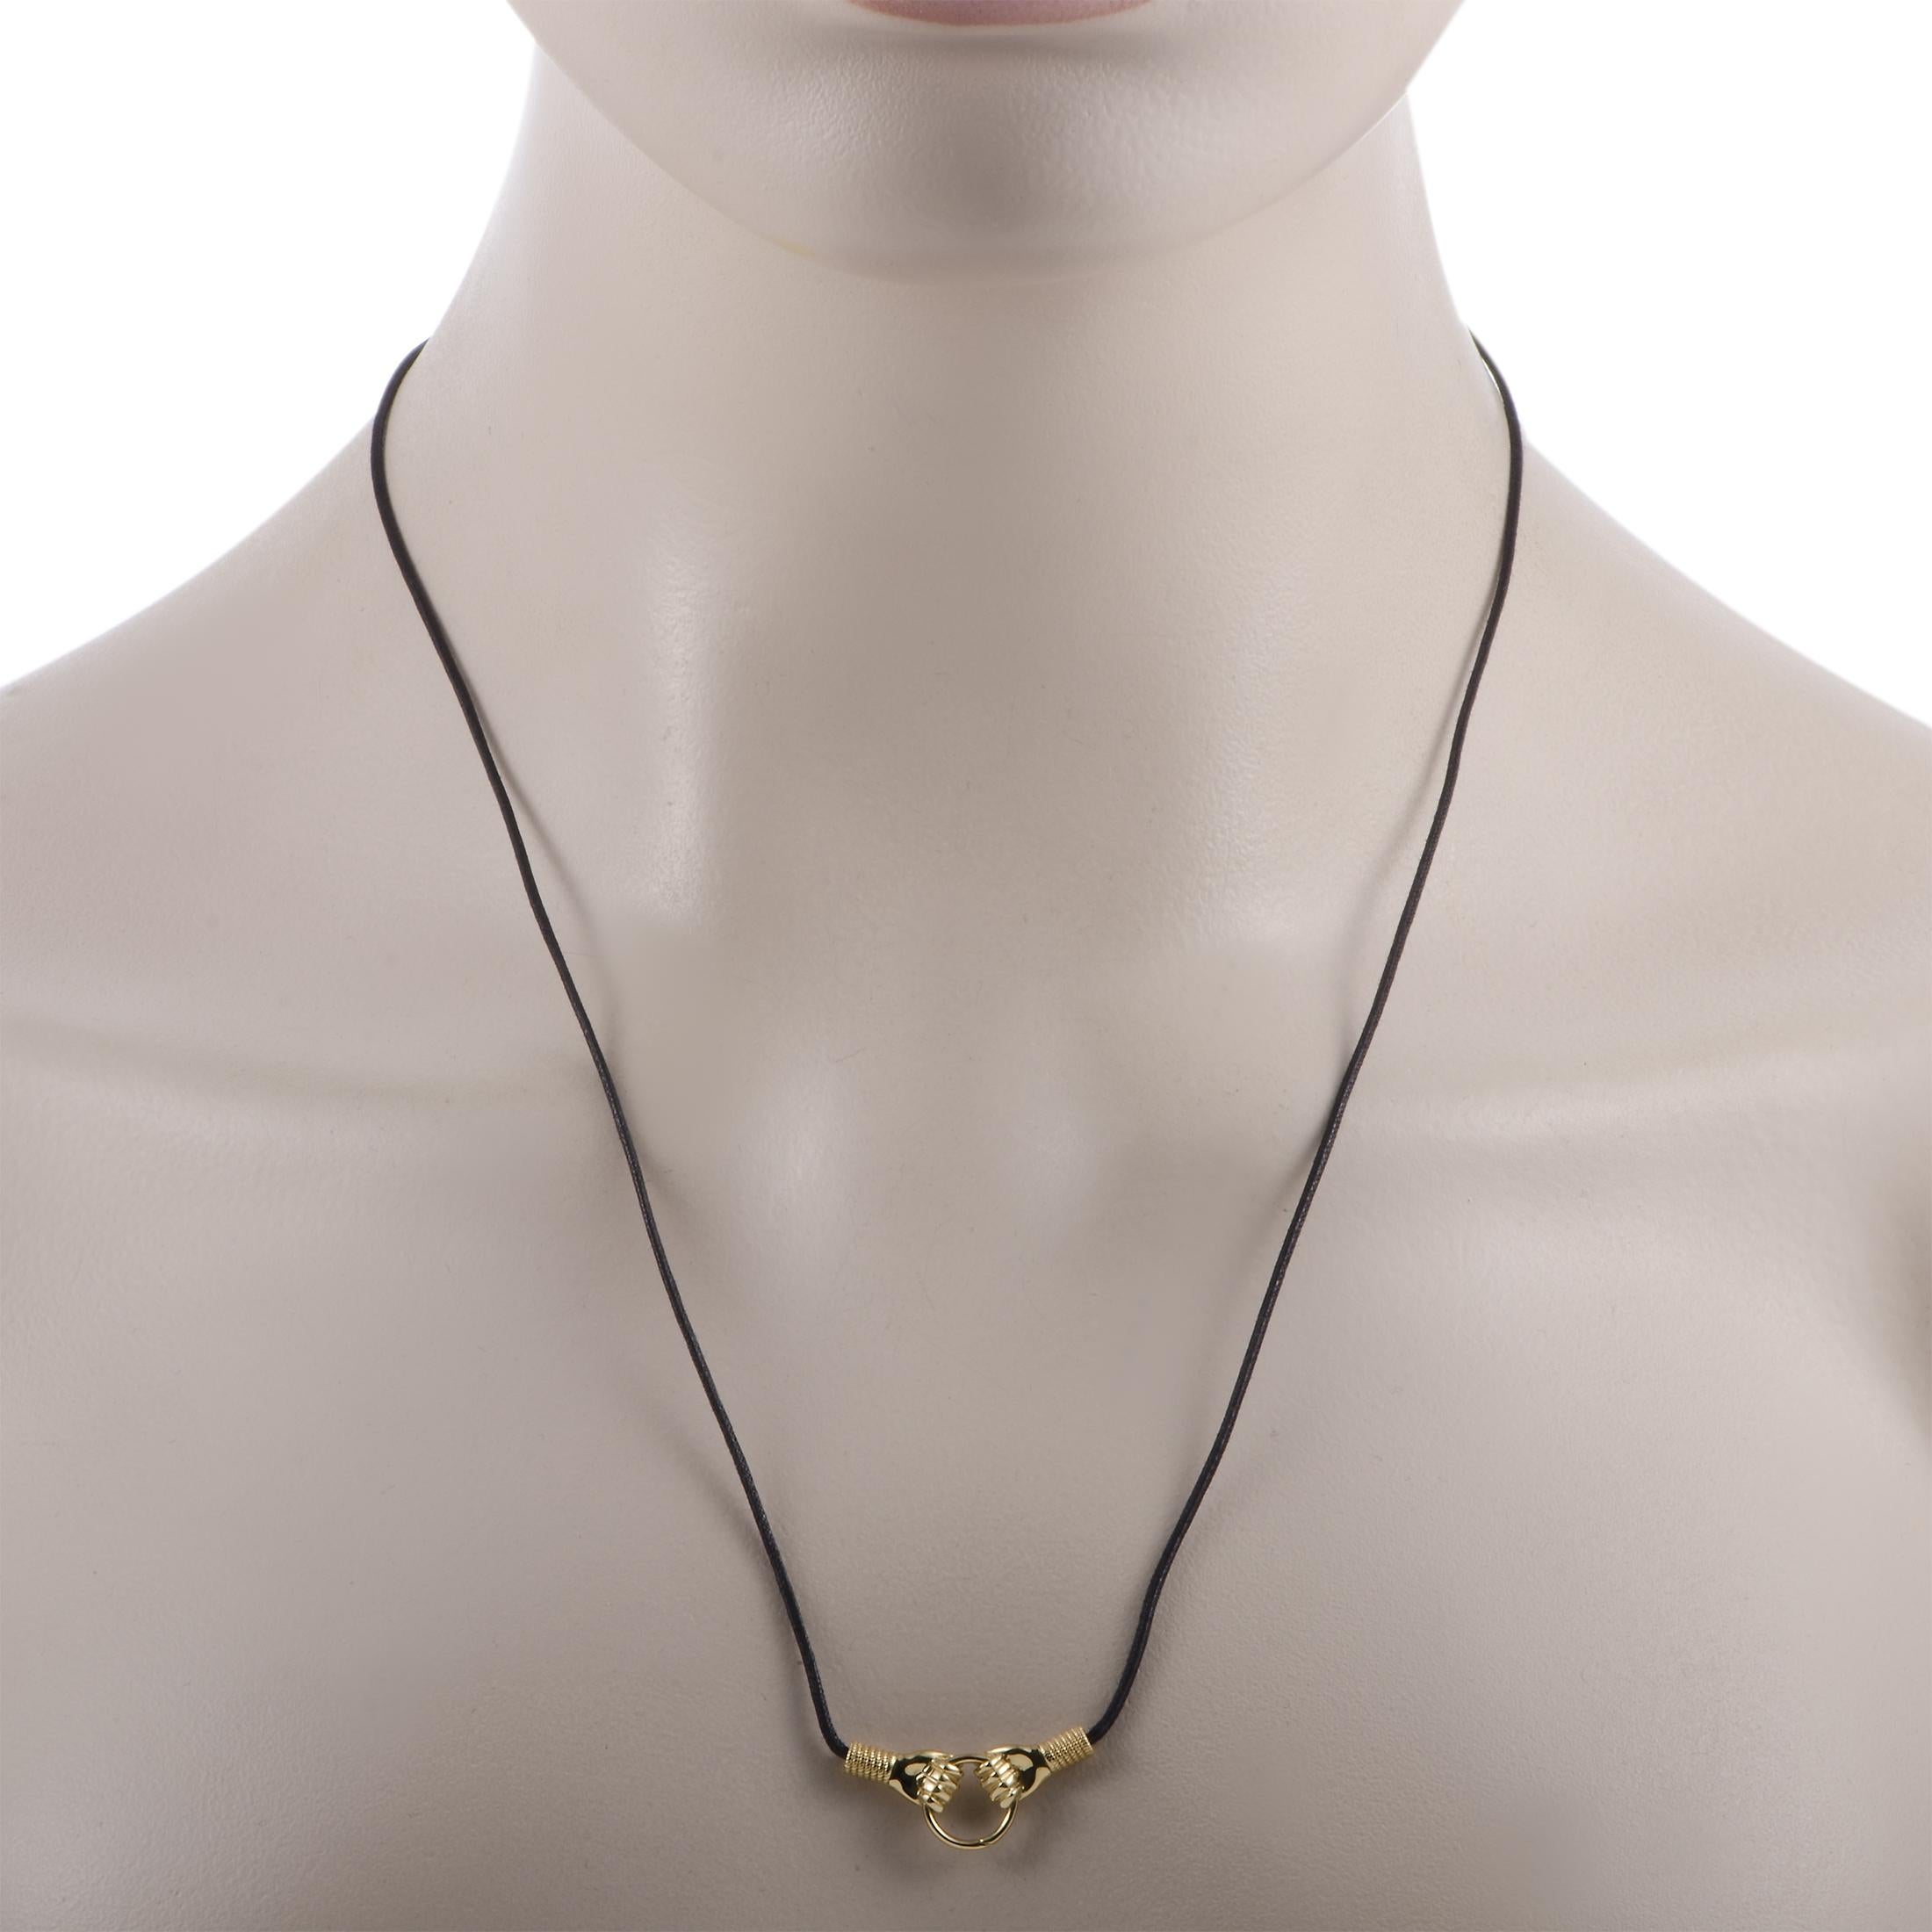 The Gucci “Le Marché des Merveilles” necklace is presented with a 22” black cotton cord and boasts an 18K yellow gold pendant that measures 0.50” in length and 1” in width. The necklace weighs 8 grams.
 
 This jewelry piece is offered in brand new